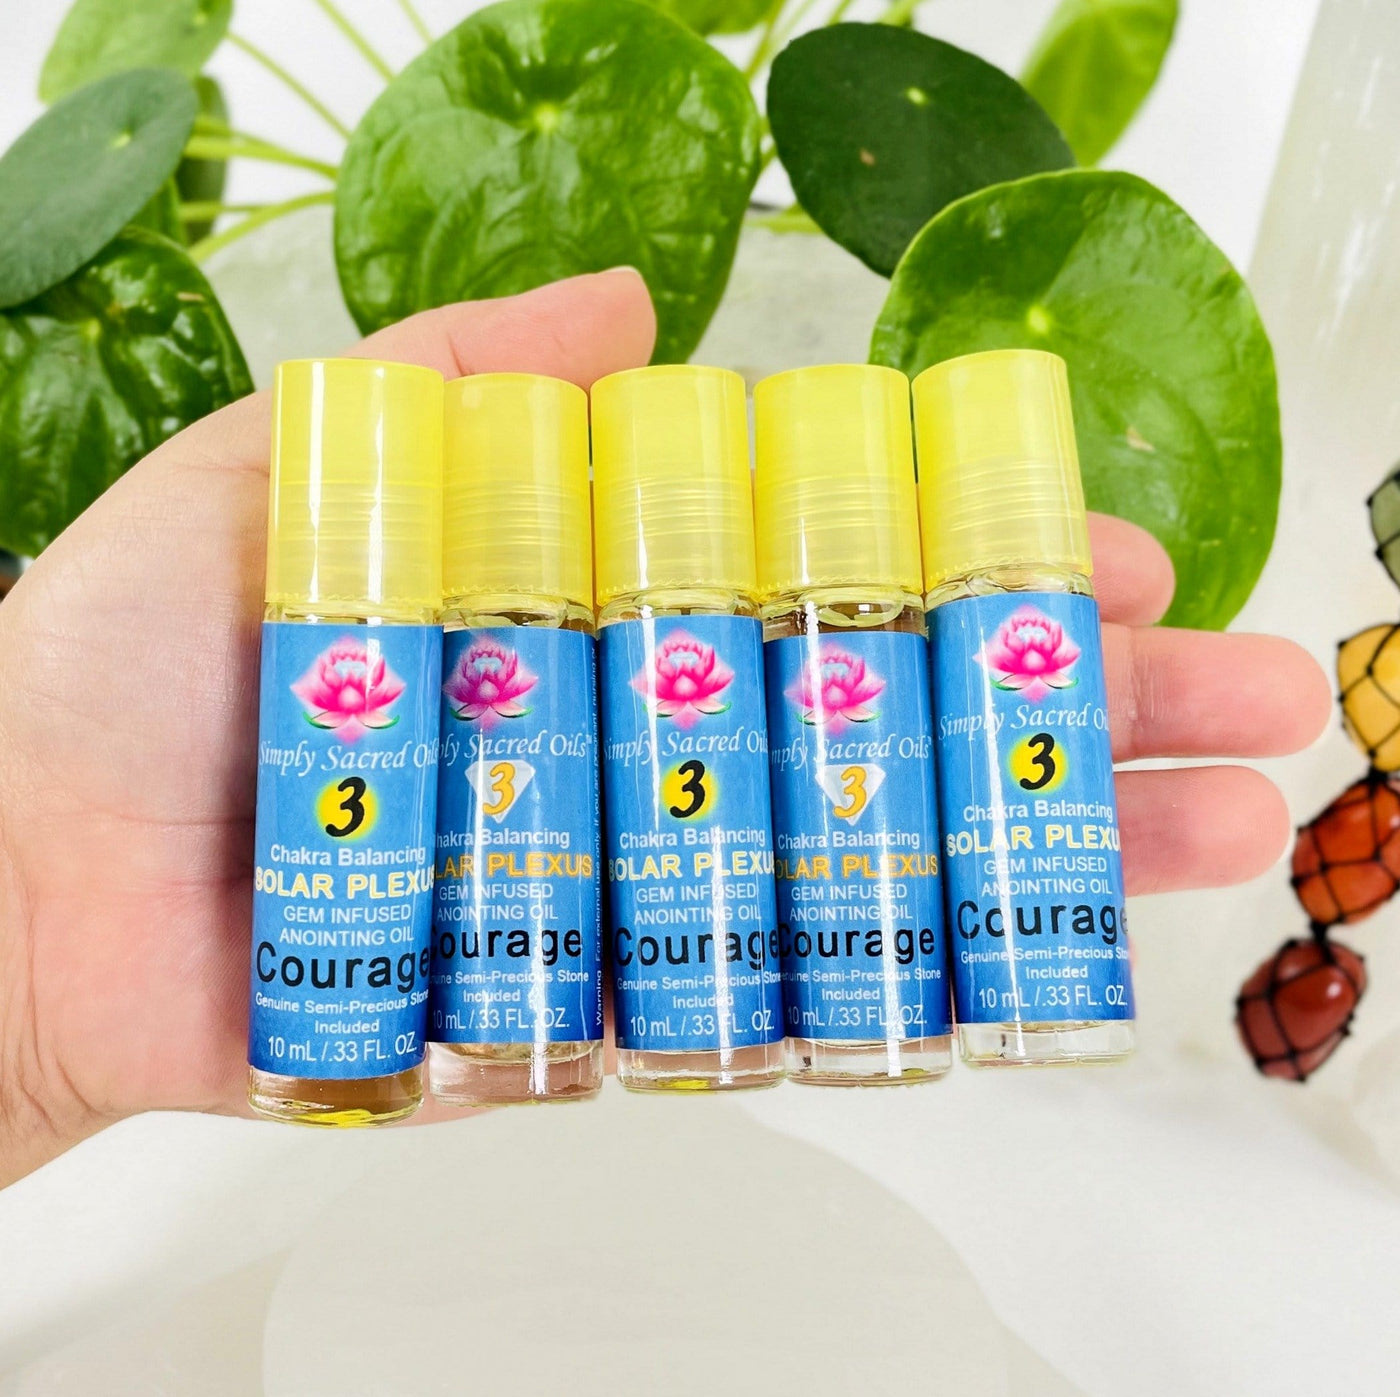 multiple Simply Sacred Oil -  Solar Plexus Chakra Balancing Oil bottles in hand for size reference